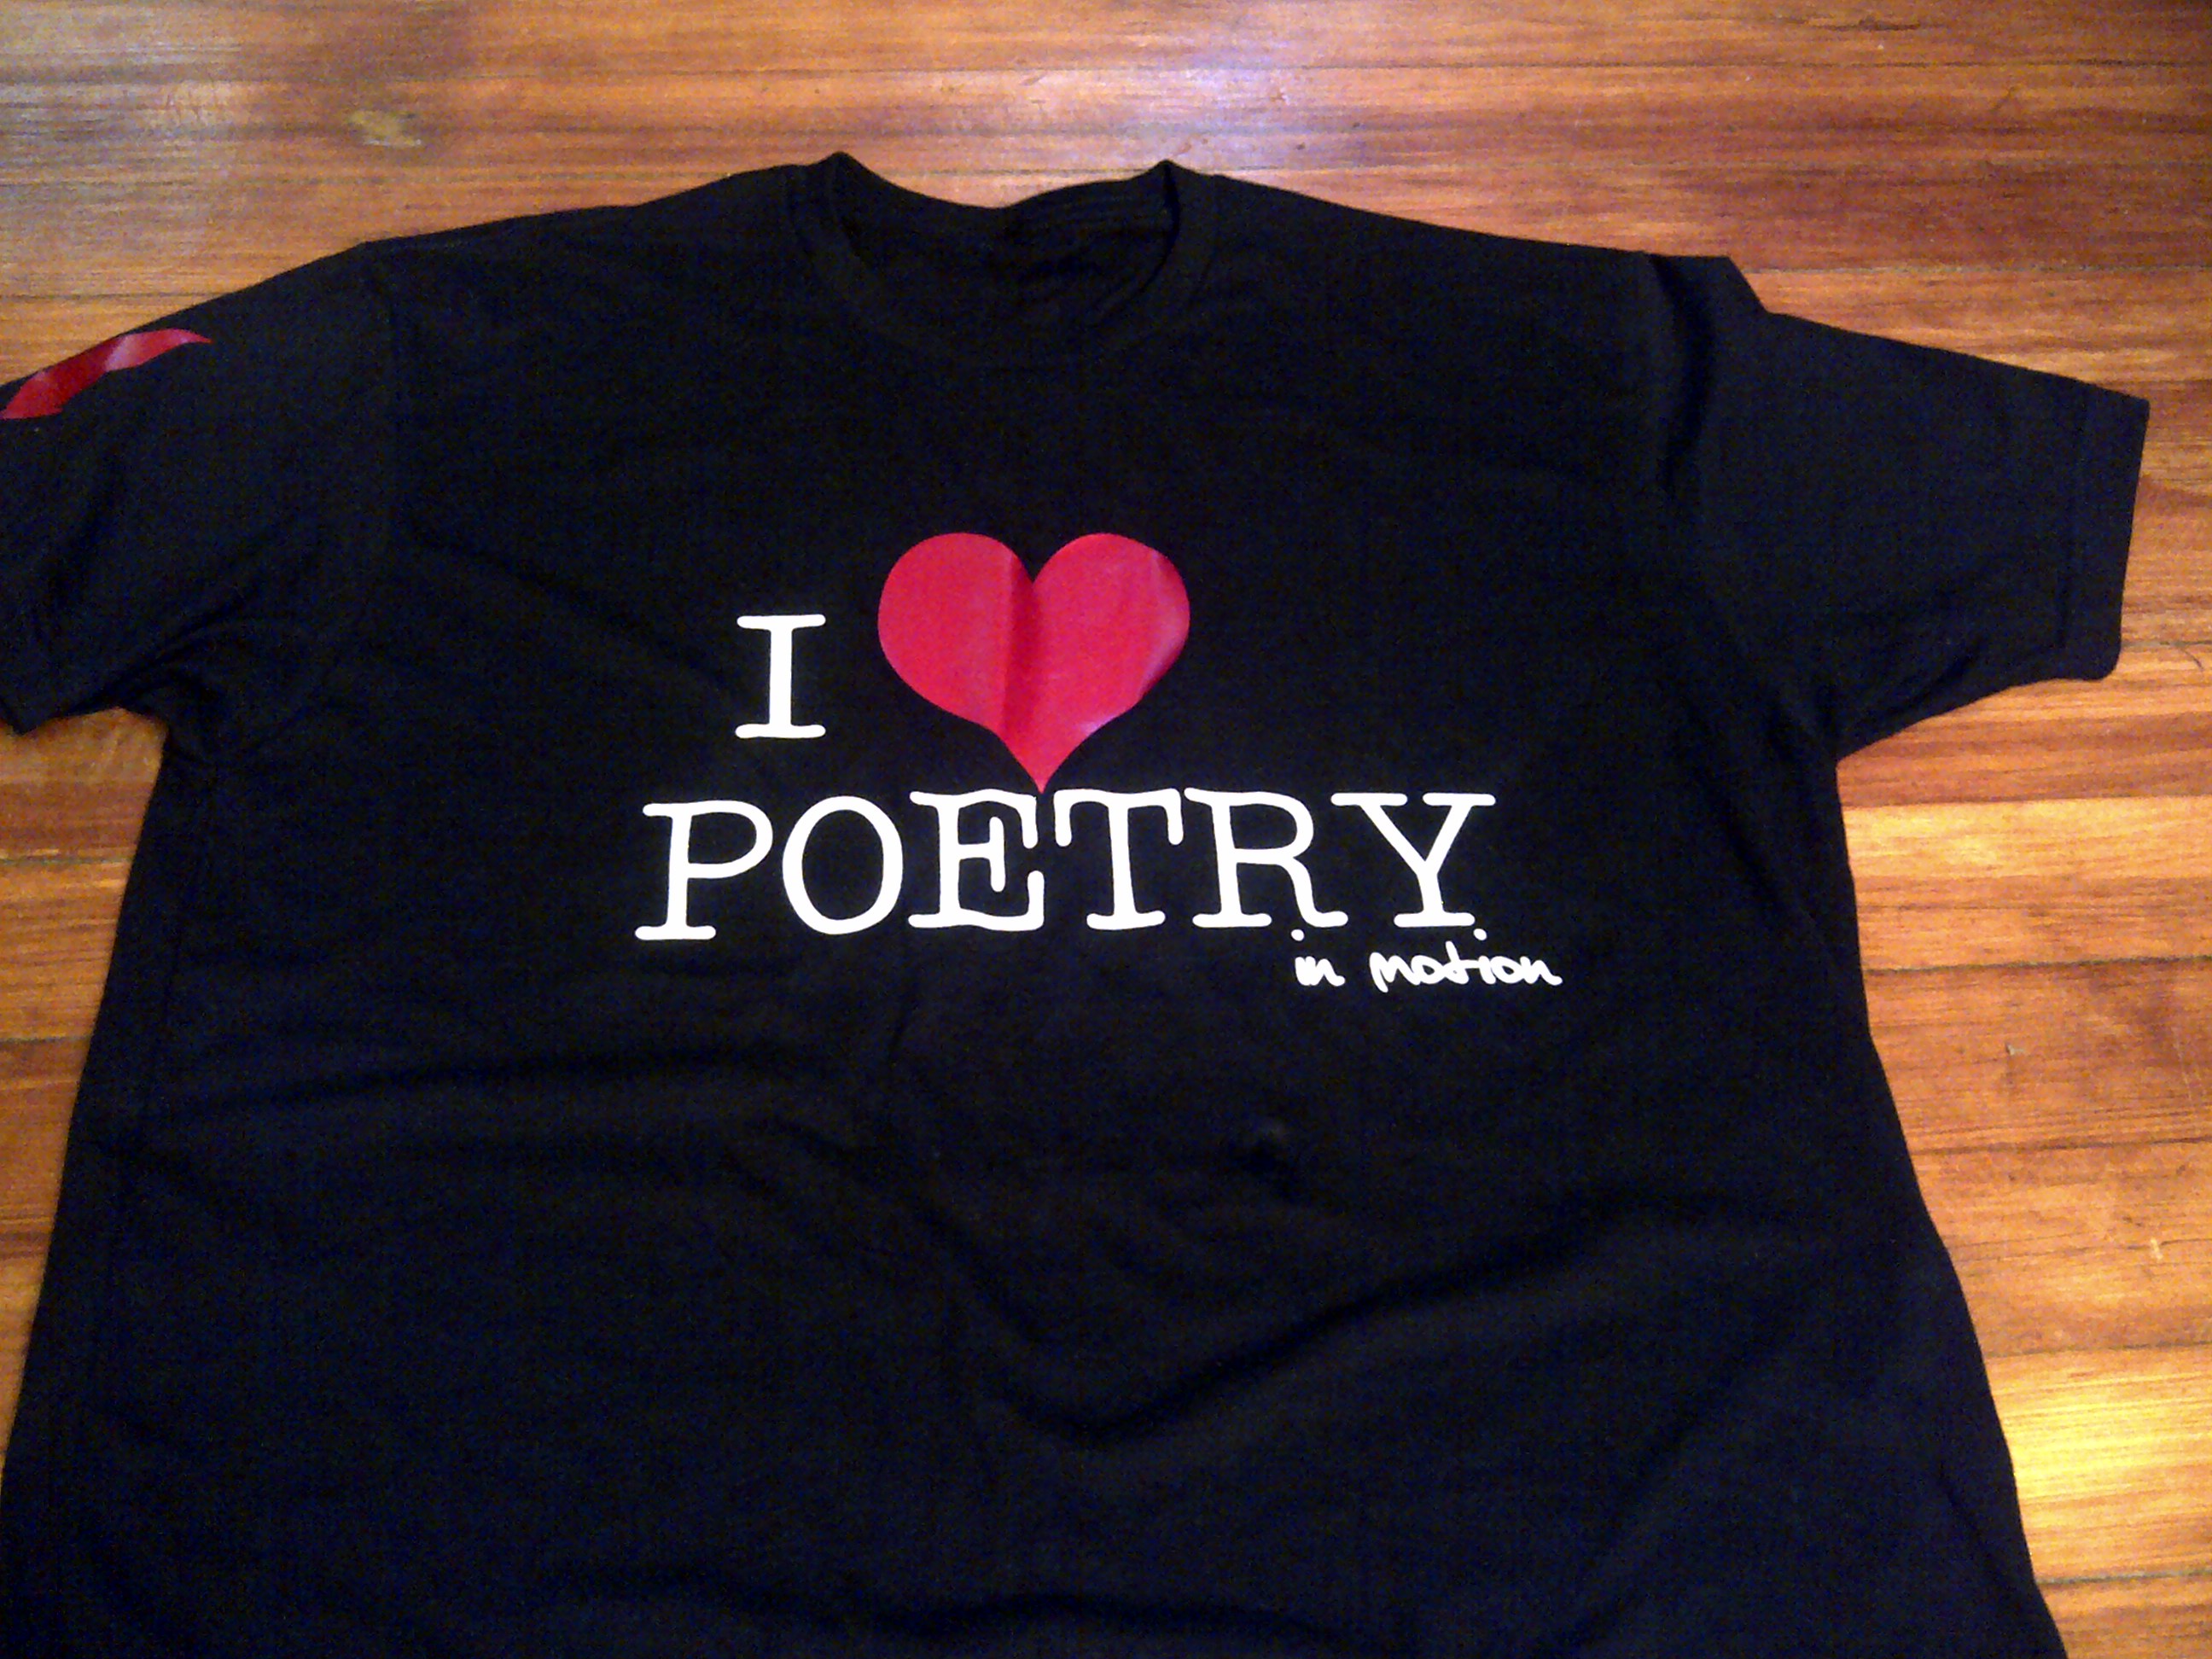 LOVE POETRY T SHIRT